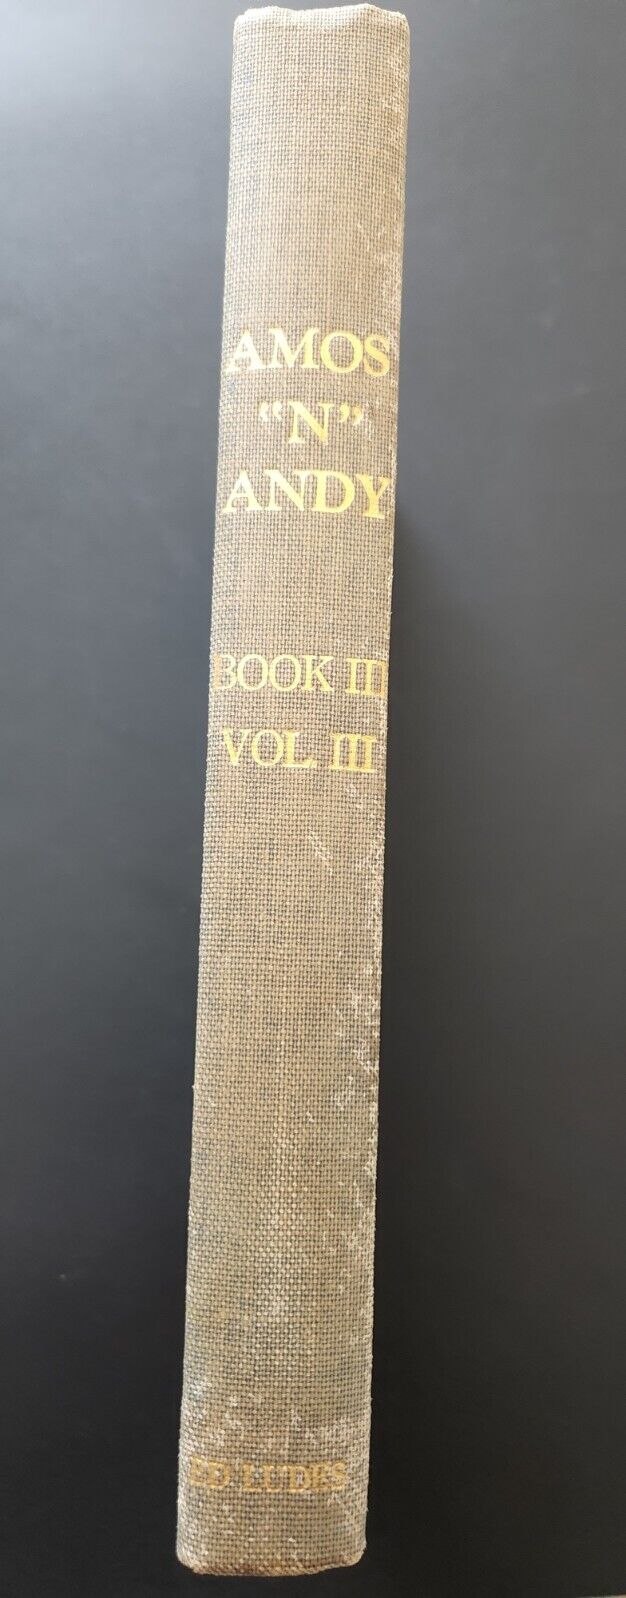 Amos And Andy 9 Original 1946 Radio Show Scripts Ed Ludes Bound Collection